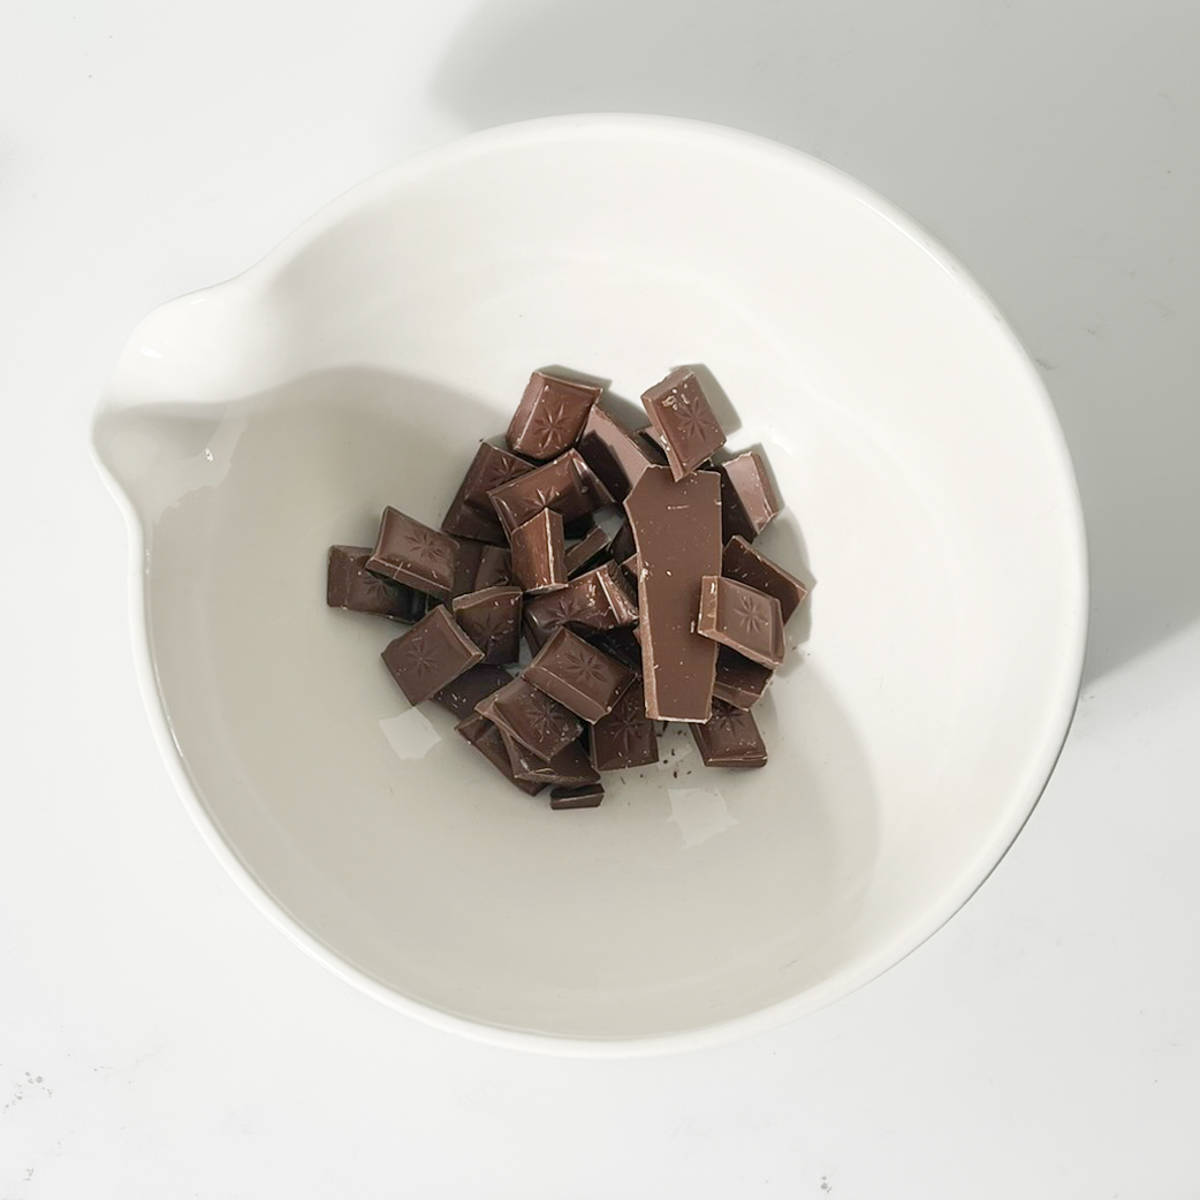 Broken up chocolate in a large white bowl.